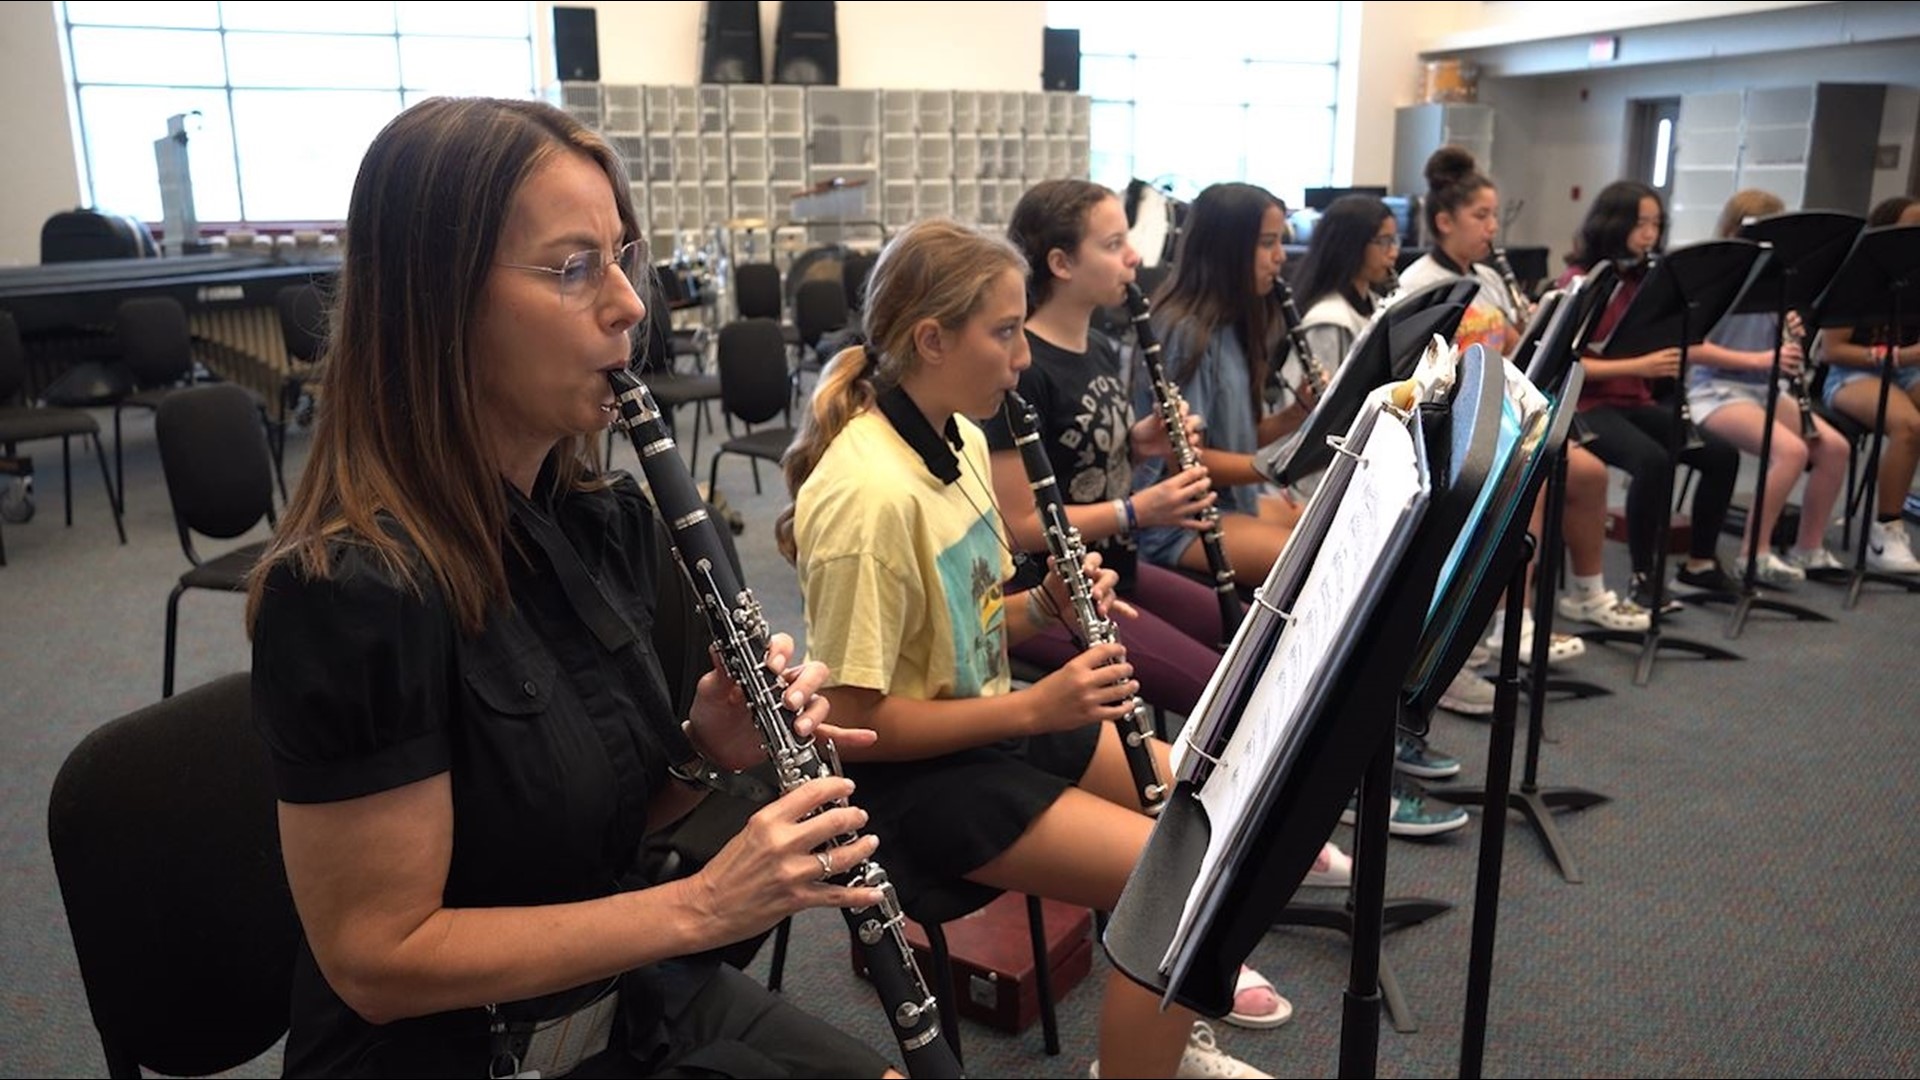 Laura Bell teaches at Stafford Middle School in Frisco. She decided this year she was going to learn to play the clarinet right alongside some of her sixth graders.